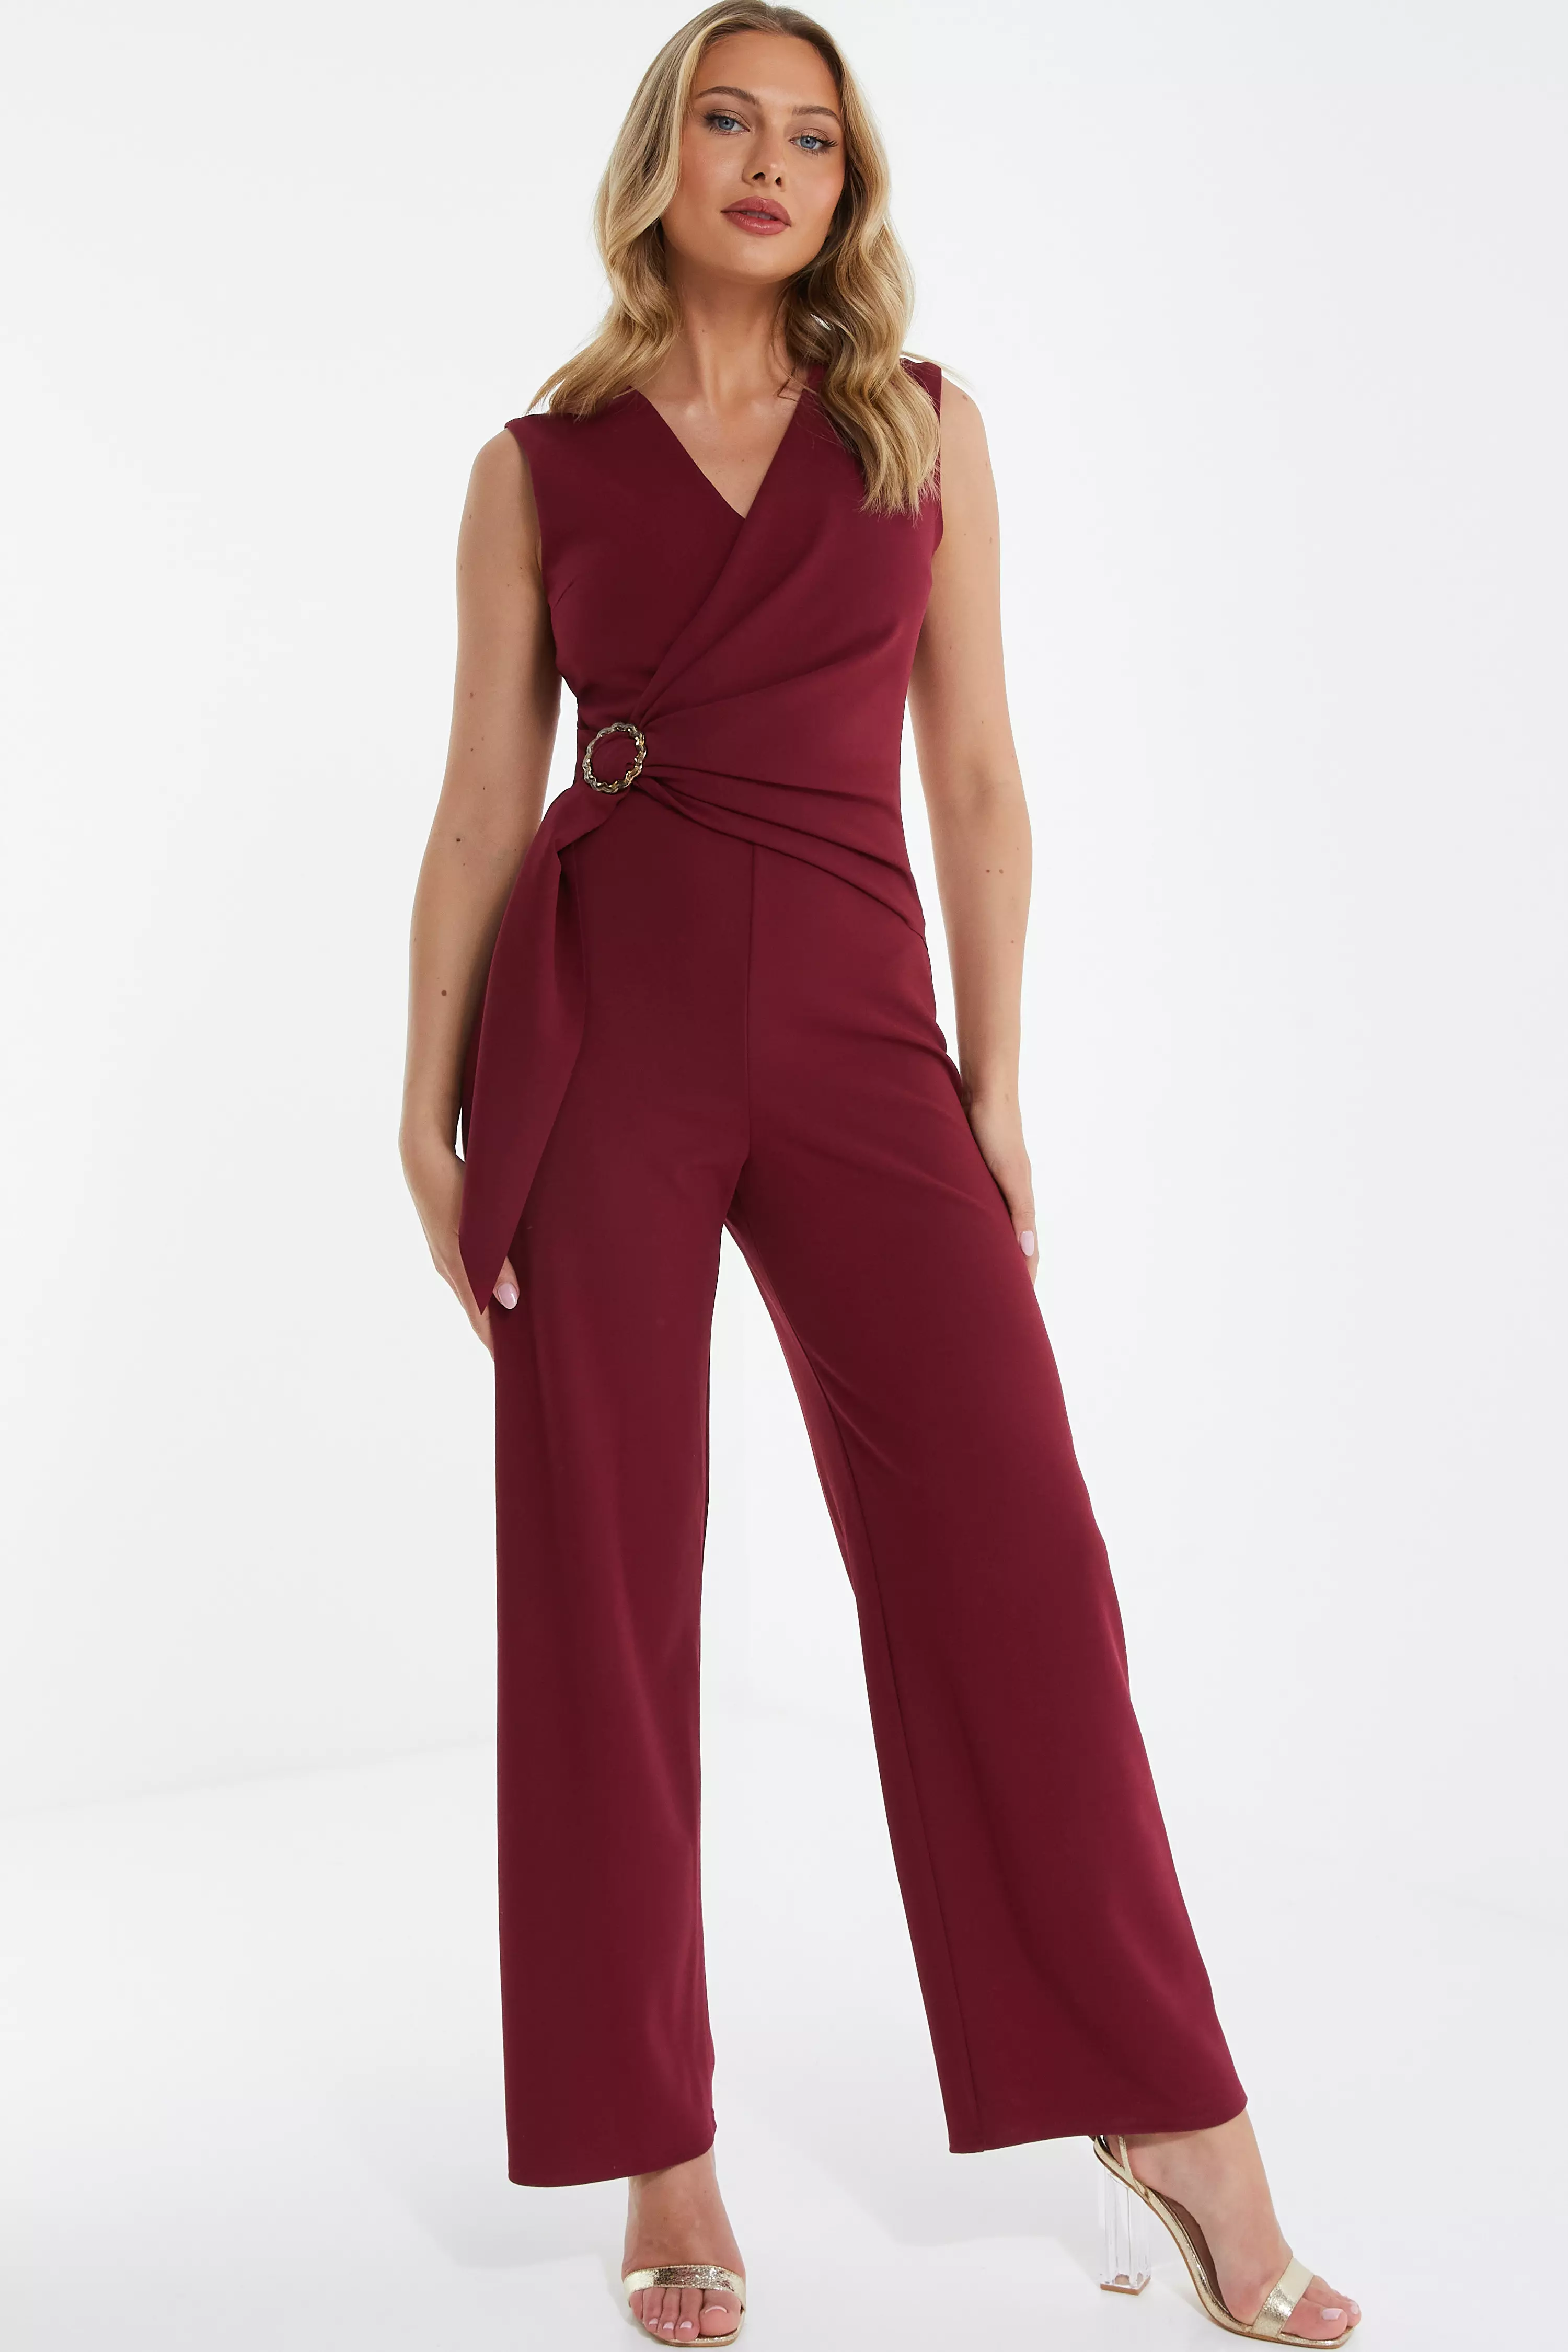 Red Ruched Waist Palazzo Jumpsuit - QUIZ Clothing